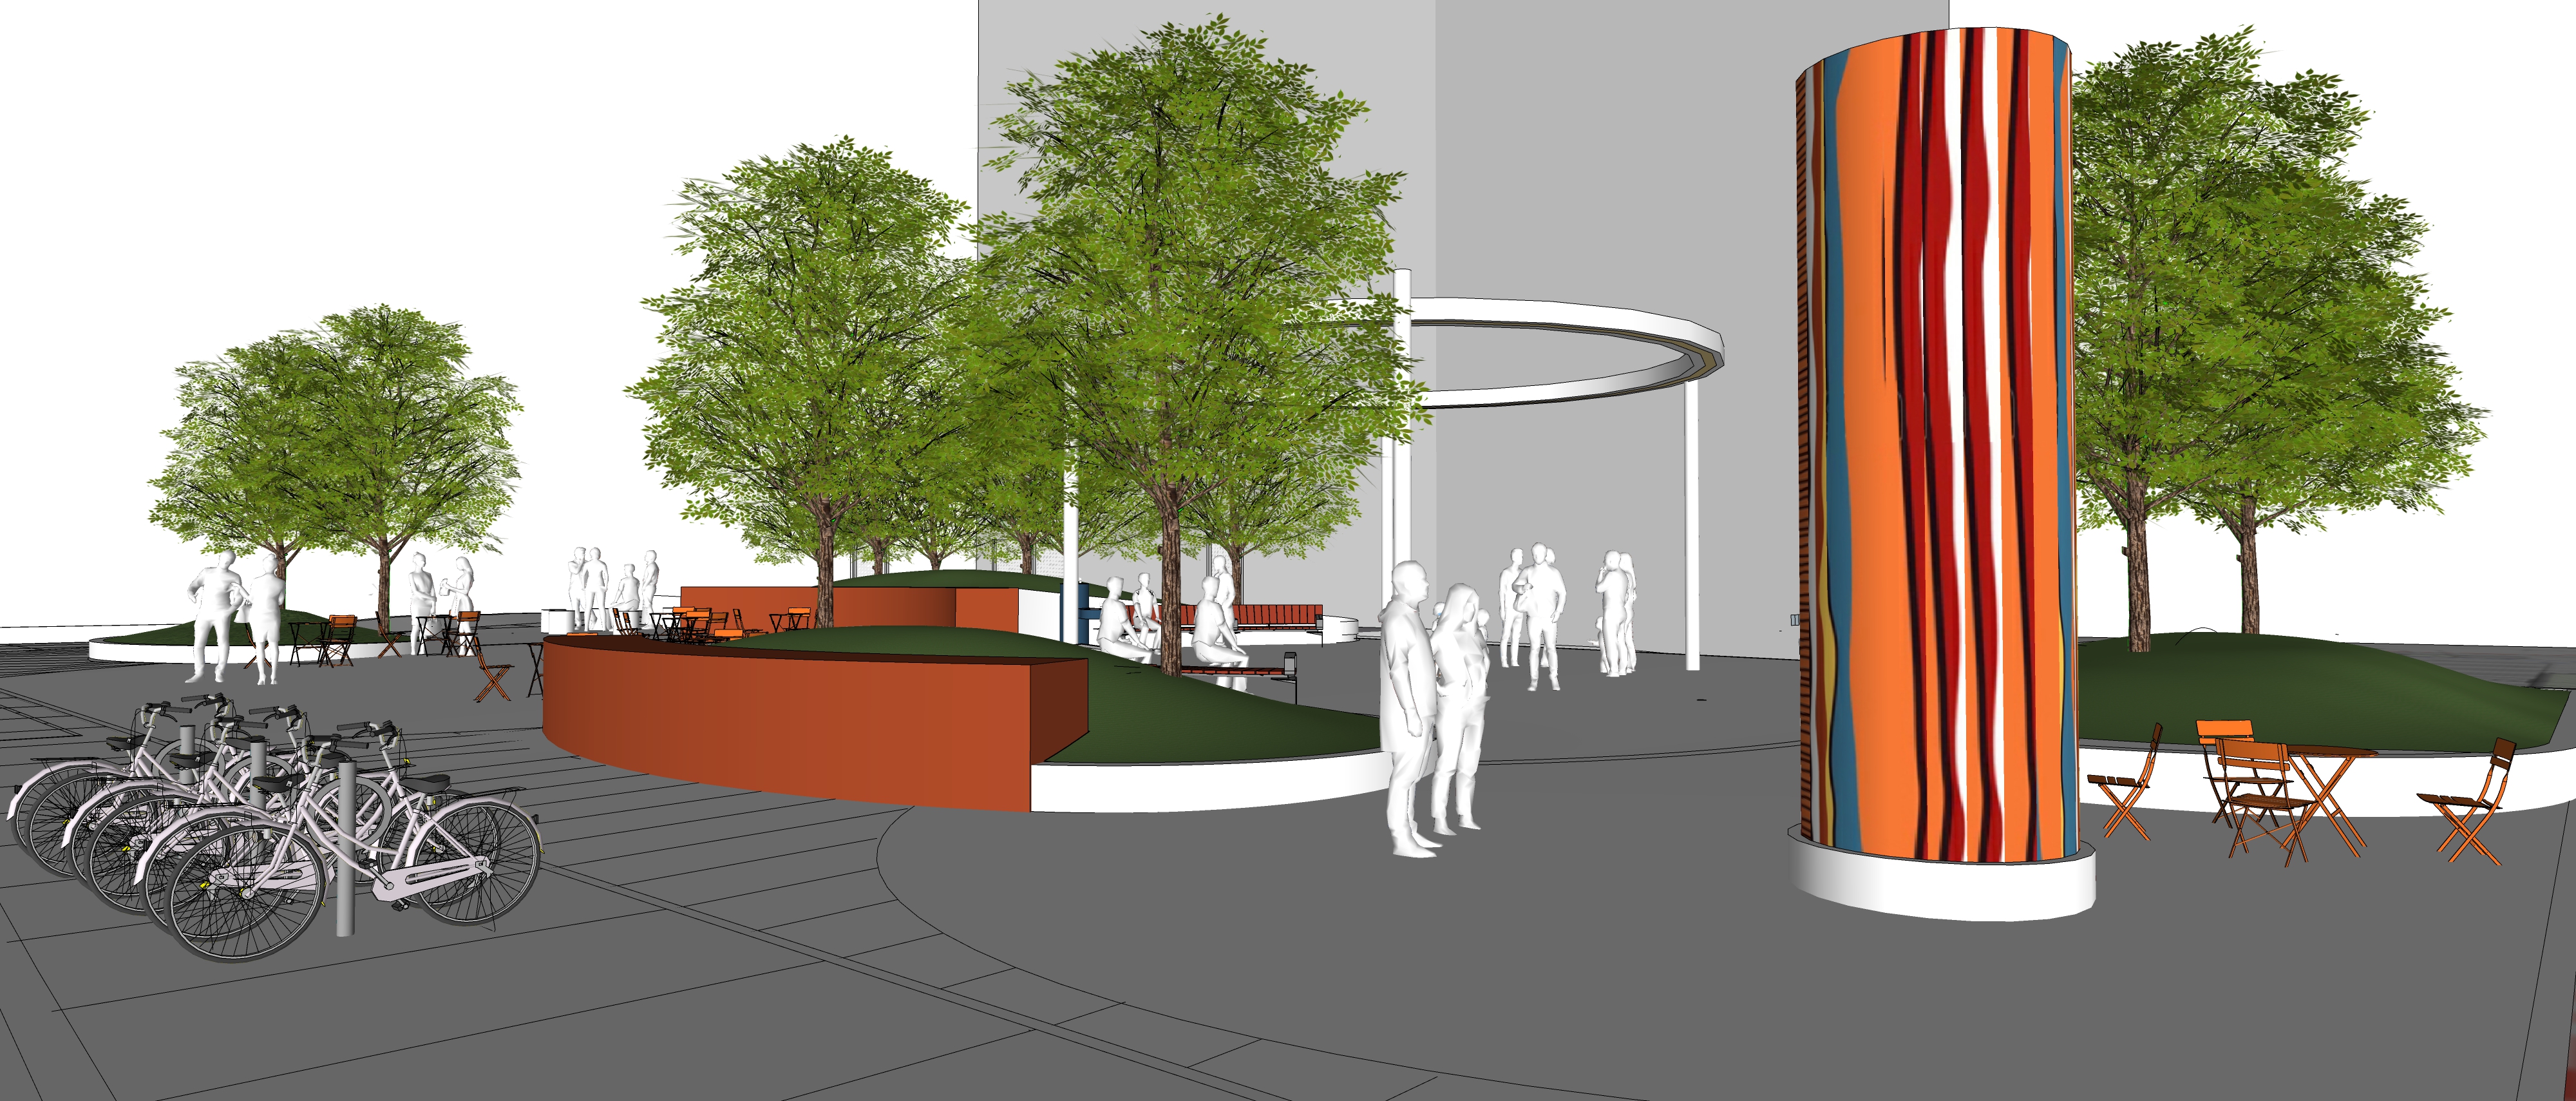 View from the South–East entrance (along St. Clair Ave. W. frontage) of the proposed park looking through the circular open spaces. As a prominent point of entrance, the east entrance is marked with a structural column with colours, and imaging to be selected that are reflective of the Indigenous community.